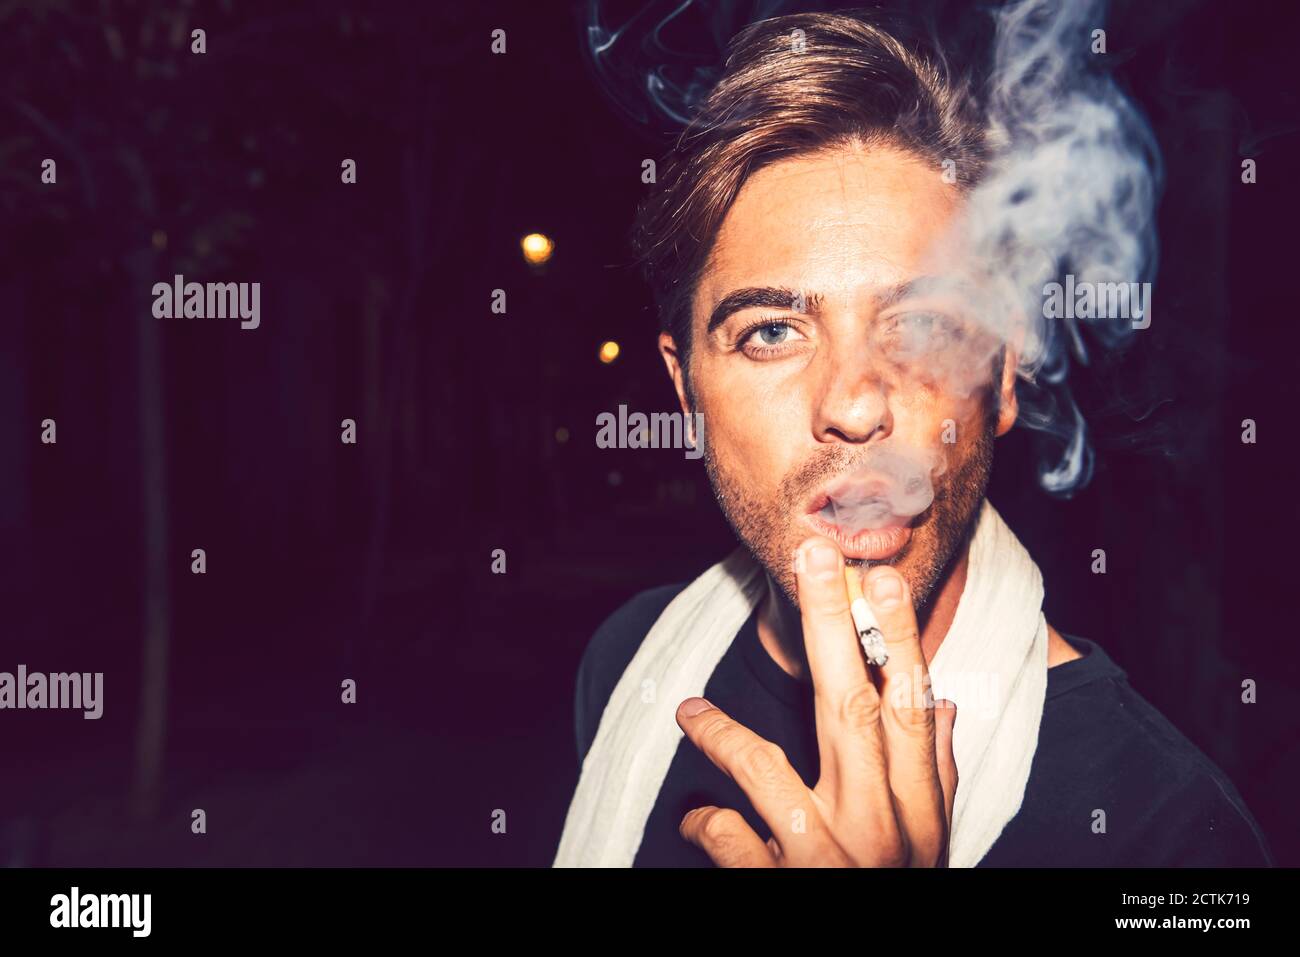 Close-up of handsome man smoking cigarette outdoors at night Stock Photo